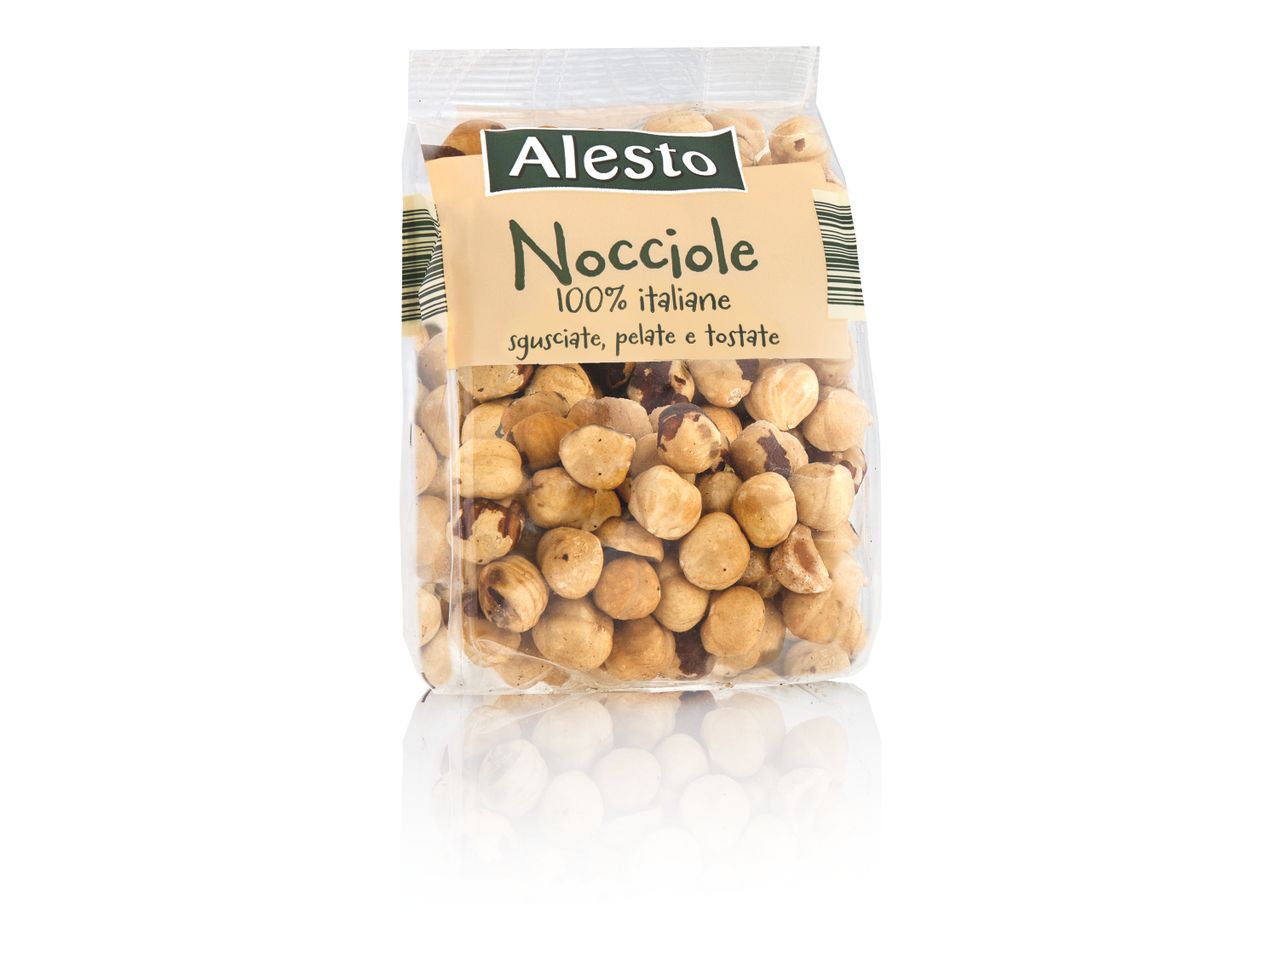 Go to full screen view: Peeled and Toasted Hazelnuts - Image 1